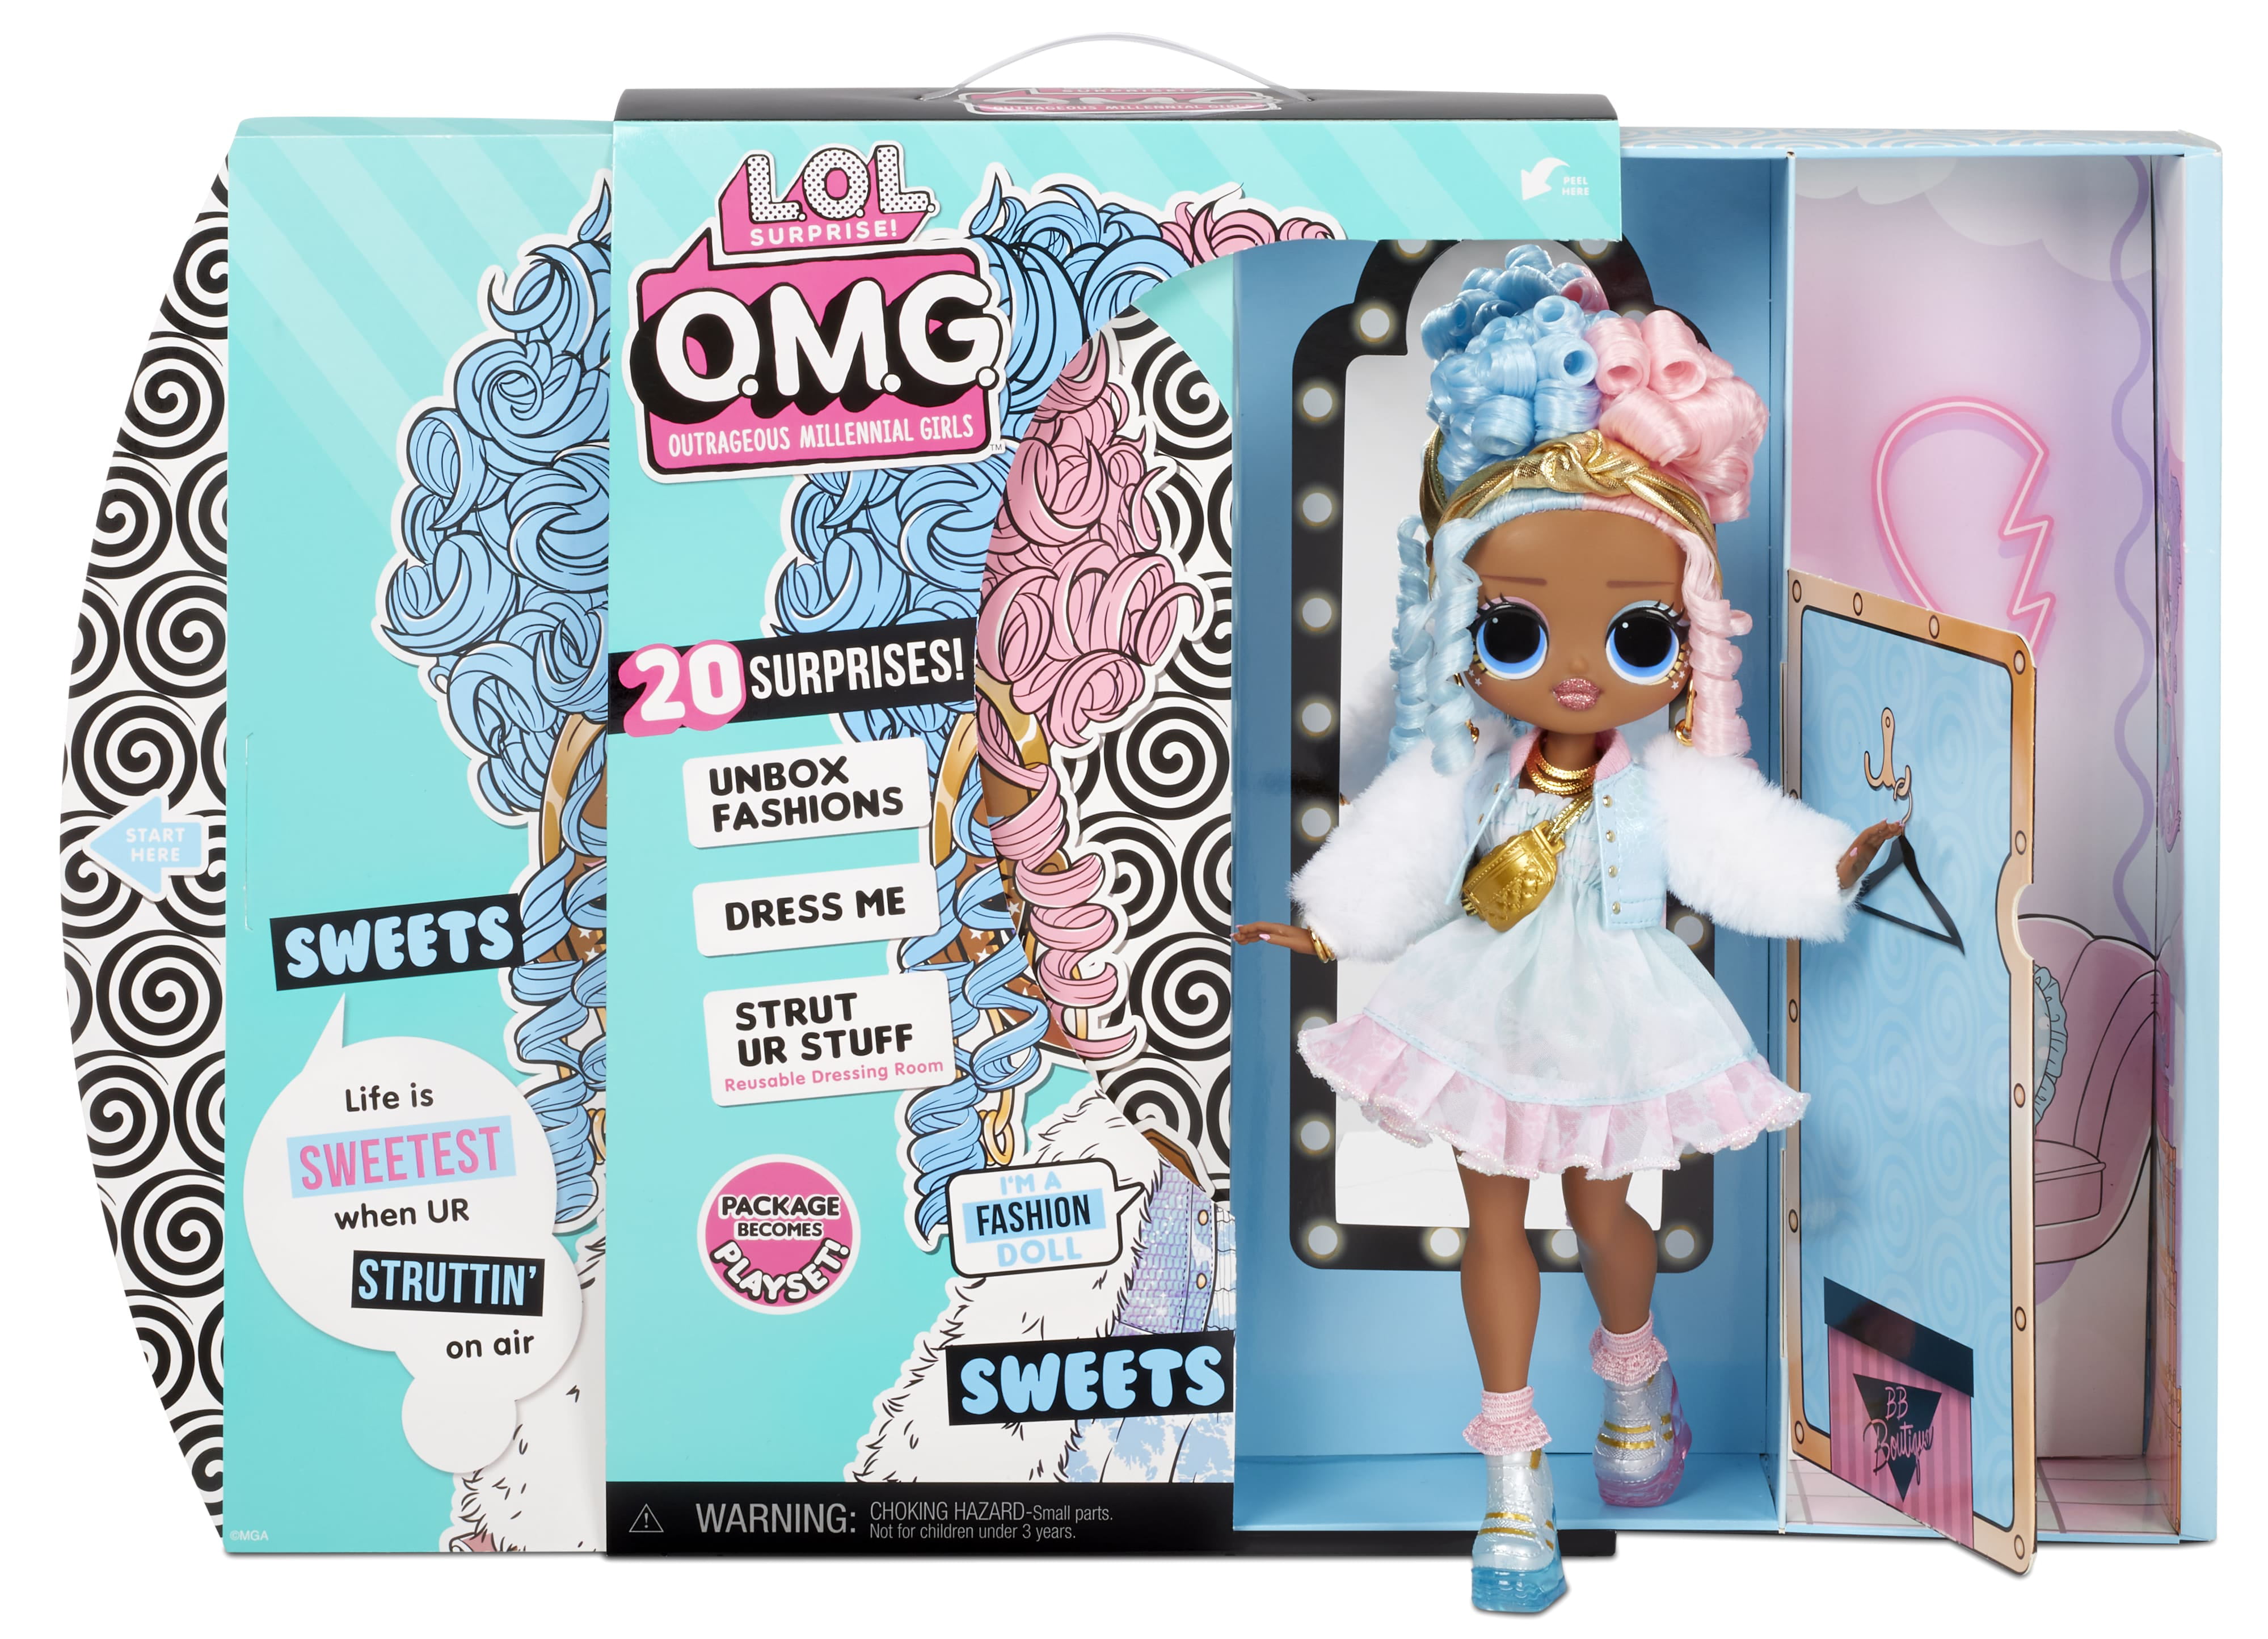 Dress Up Doll Set with 20 Surprises New LOL Surprise OMG Sweets Fashion Doll 